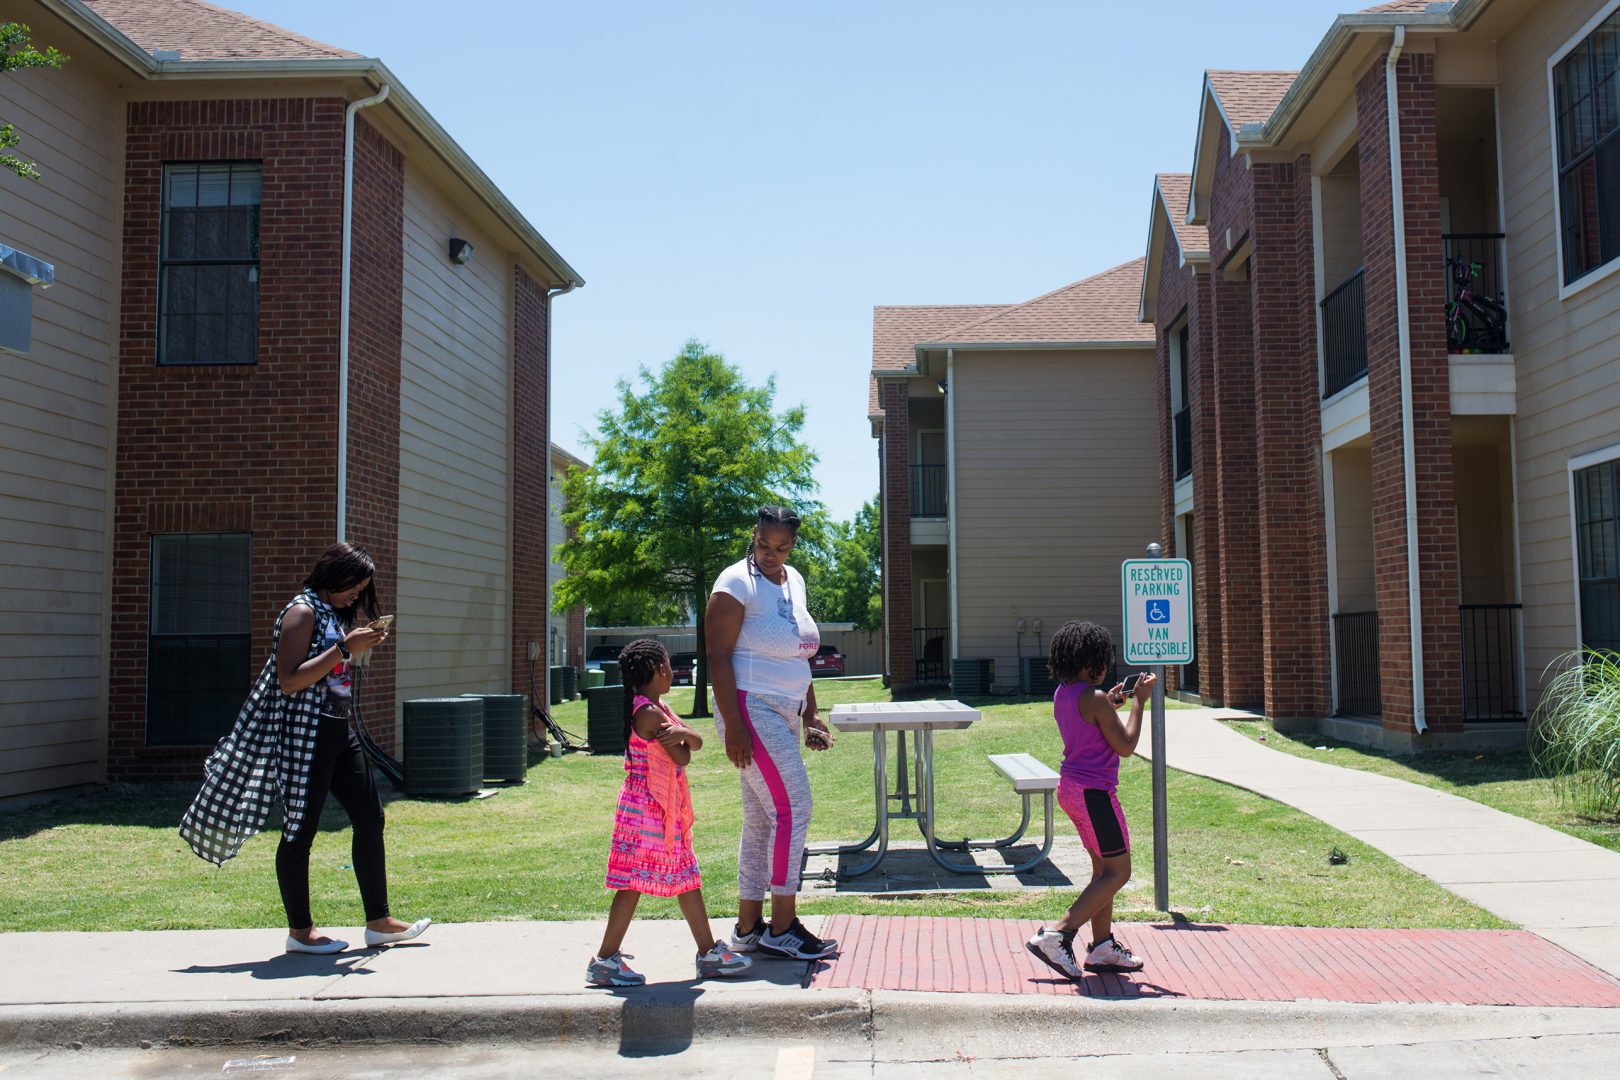 C'Artis Harris, walking with her children in 2017, was searching for housing that would accept her Section 8 voucher when NPR began following her in 2016. Today, Harris and her family still live in an area of high poverty.